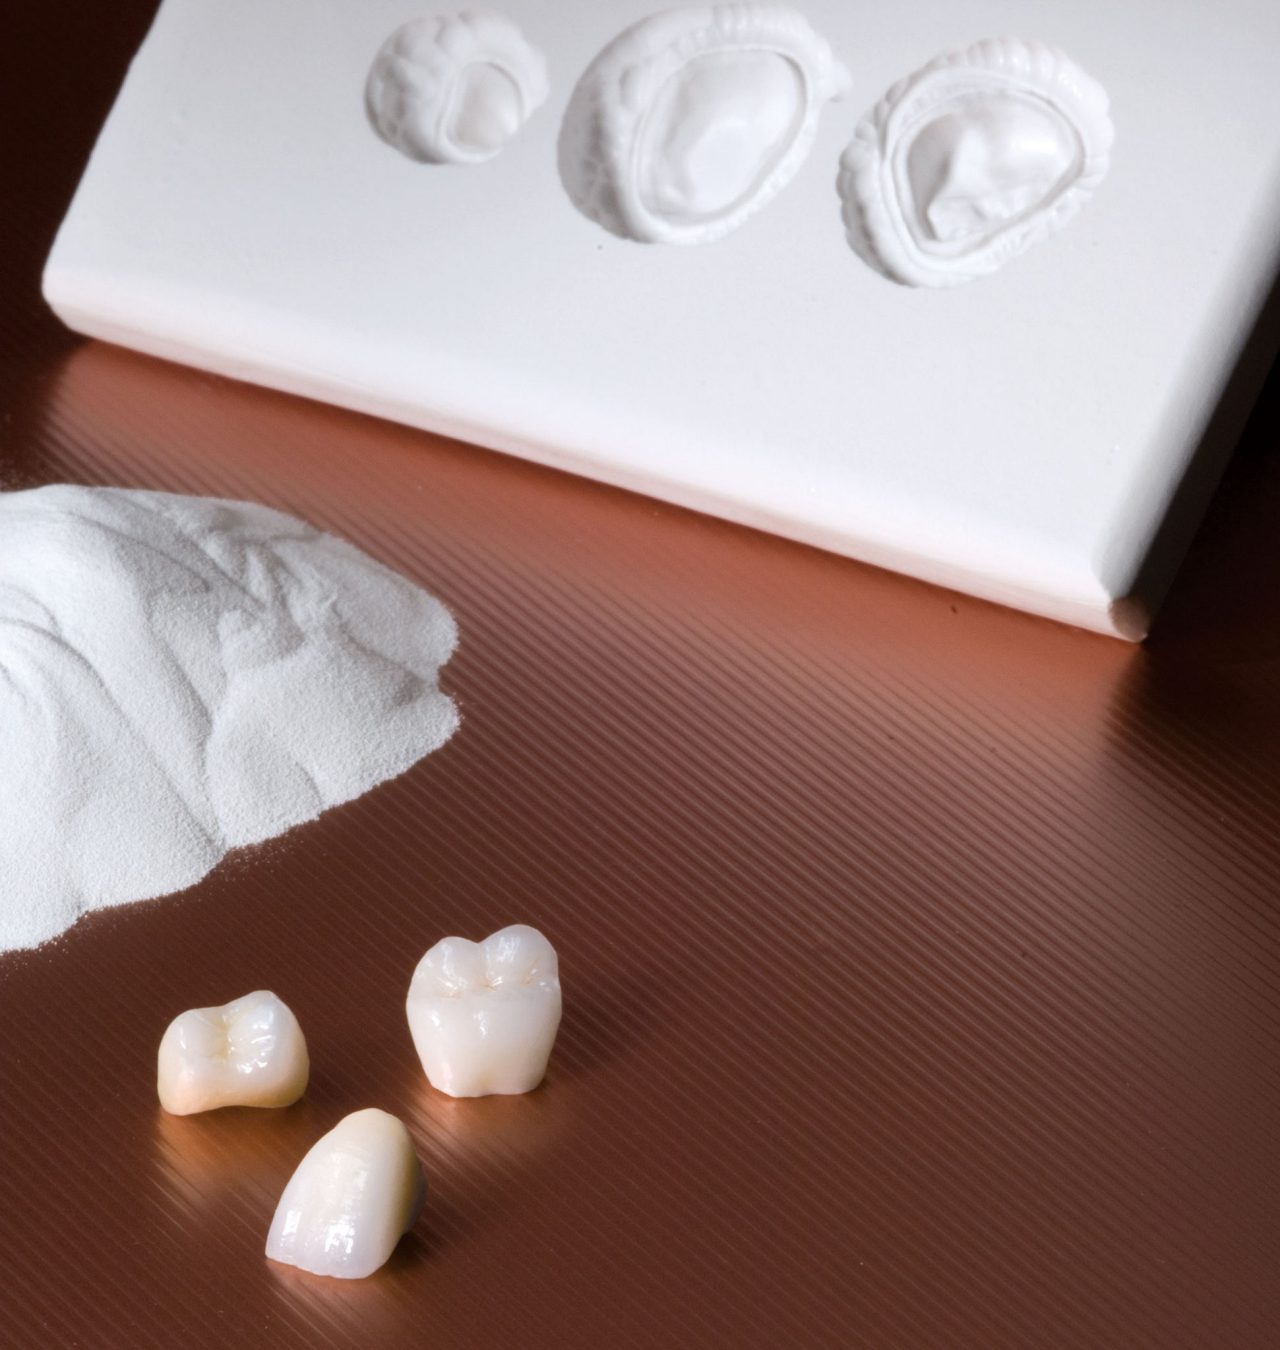 The Benefits of Bilayered Clinical Zirconia